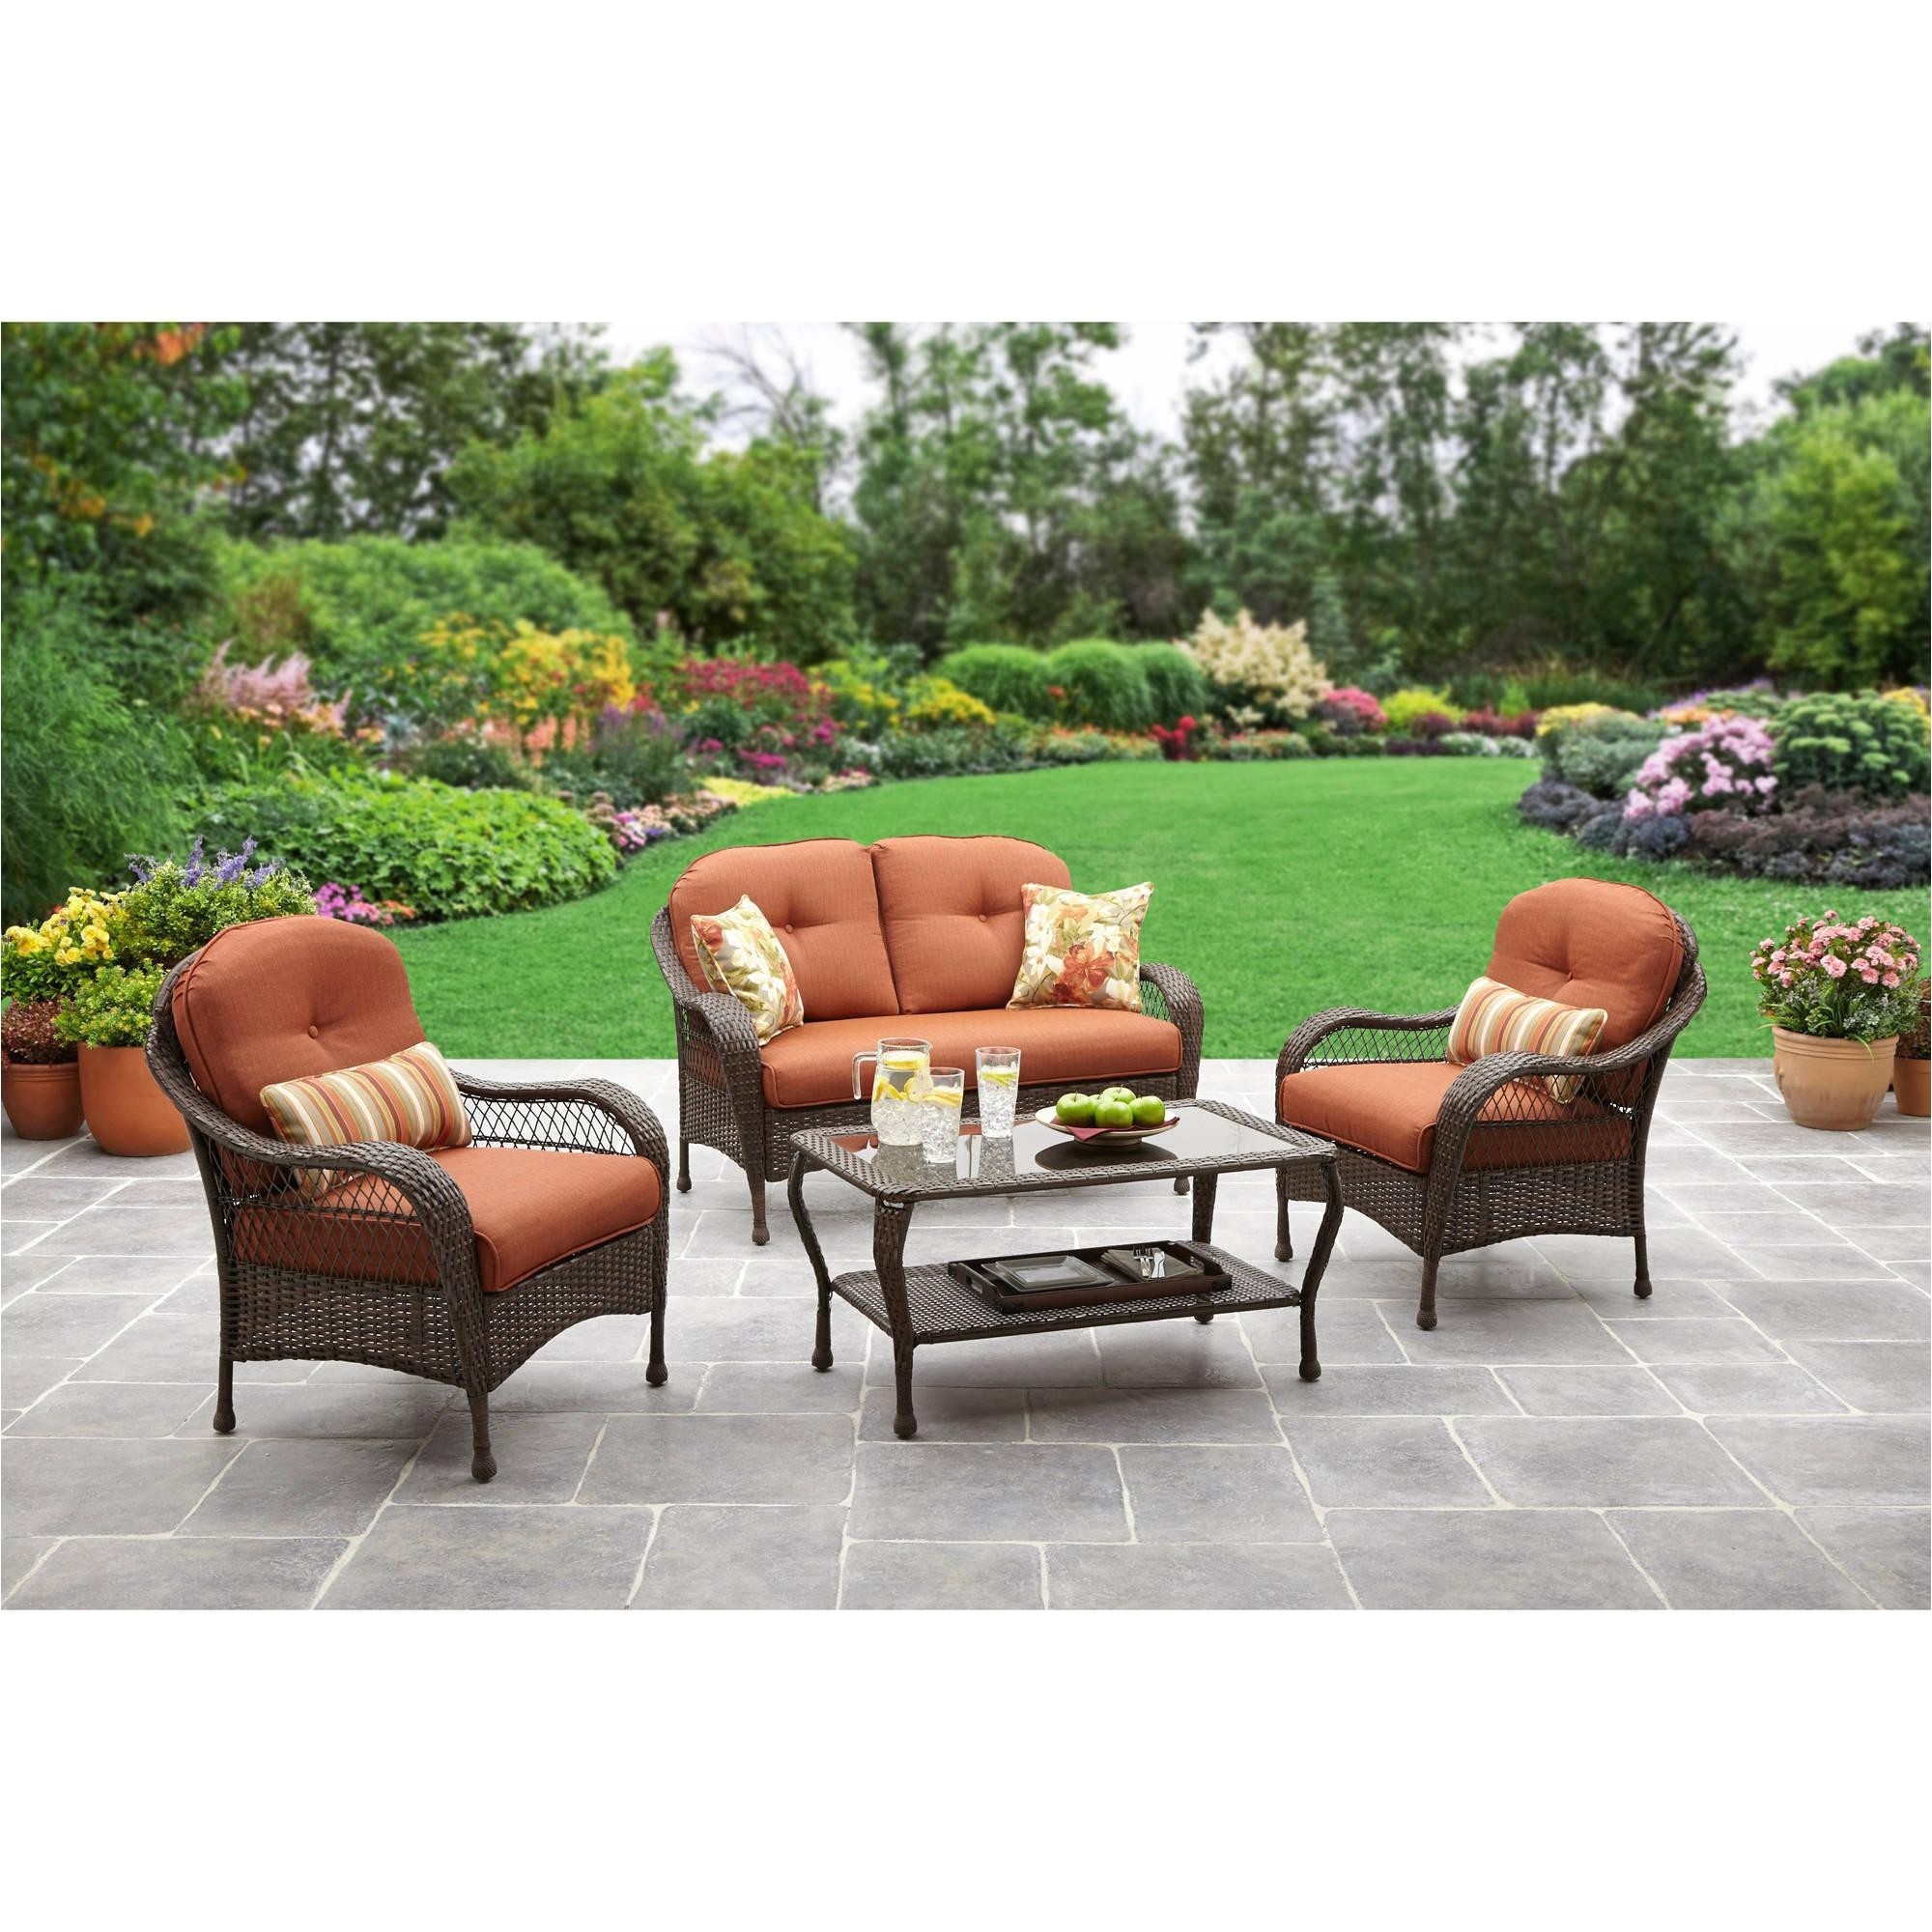 Folding Lawn Chairs at Lowes Home Design Lowes Outdoor Patio Furniture New Patio Folding Lawn